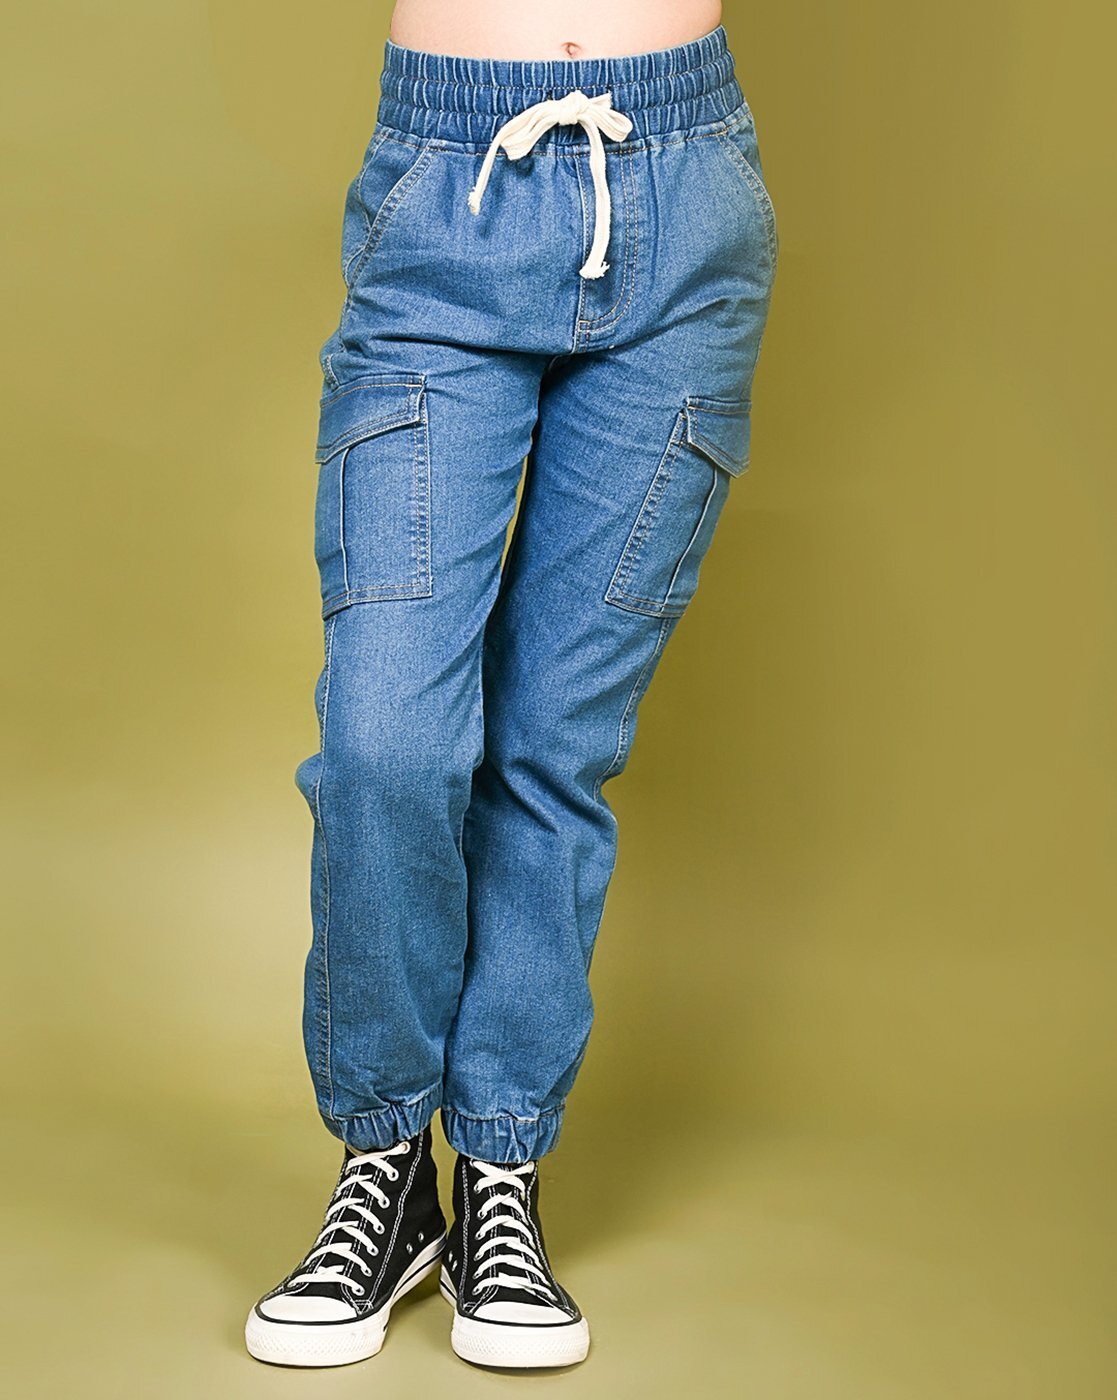 Is it just me or are denim cargo pants the worst thing ever : r/fashion